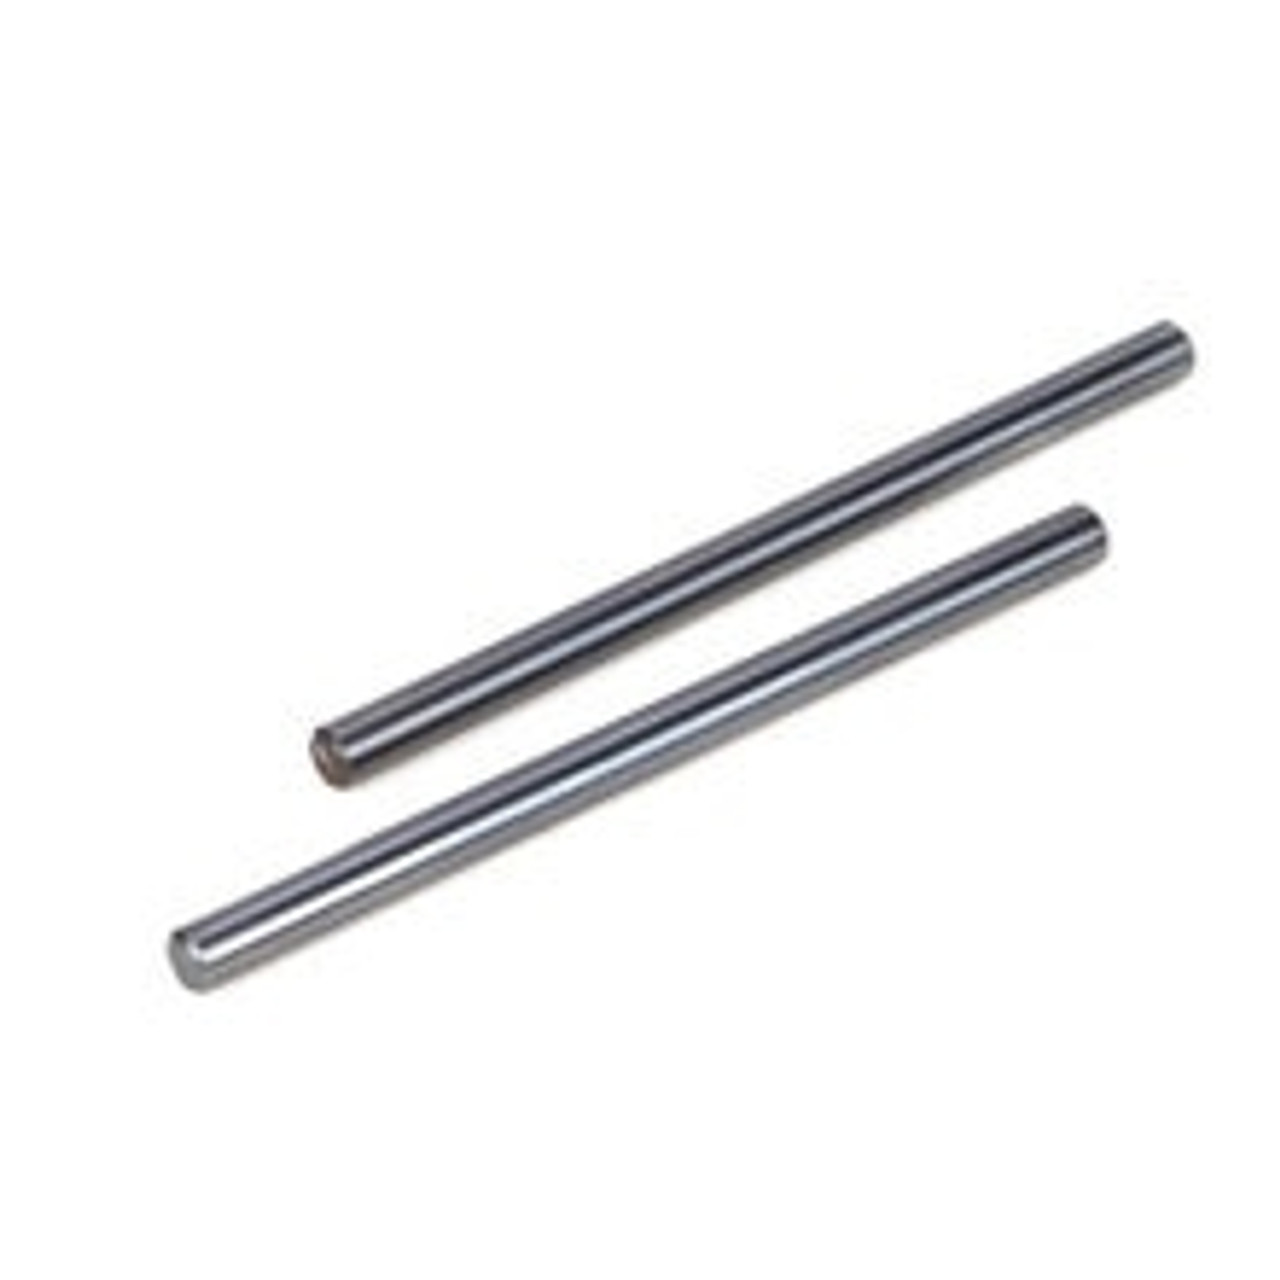 TLR Hinge Pins, 4 x 66mm, TiCn (2): 8IGHT Buggy 3.0 